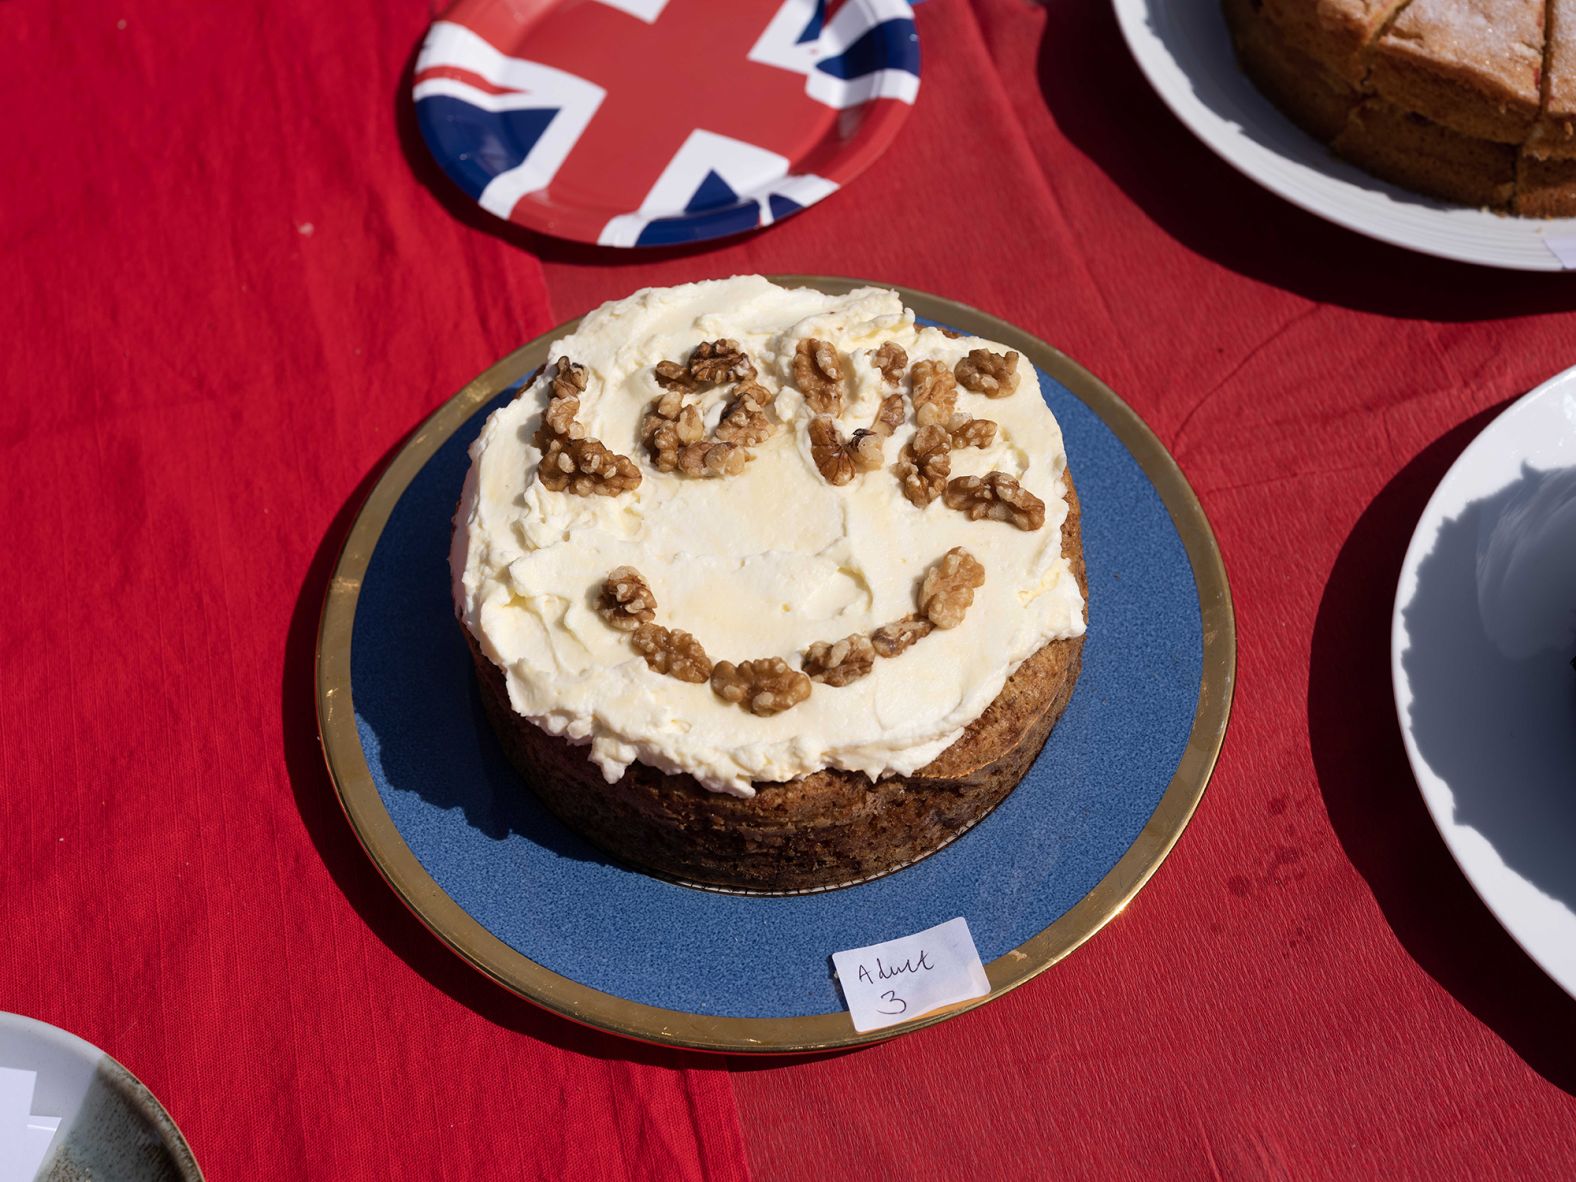 A cake competition was held at a street party in Southwark, London.